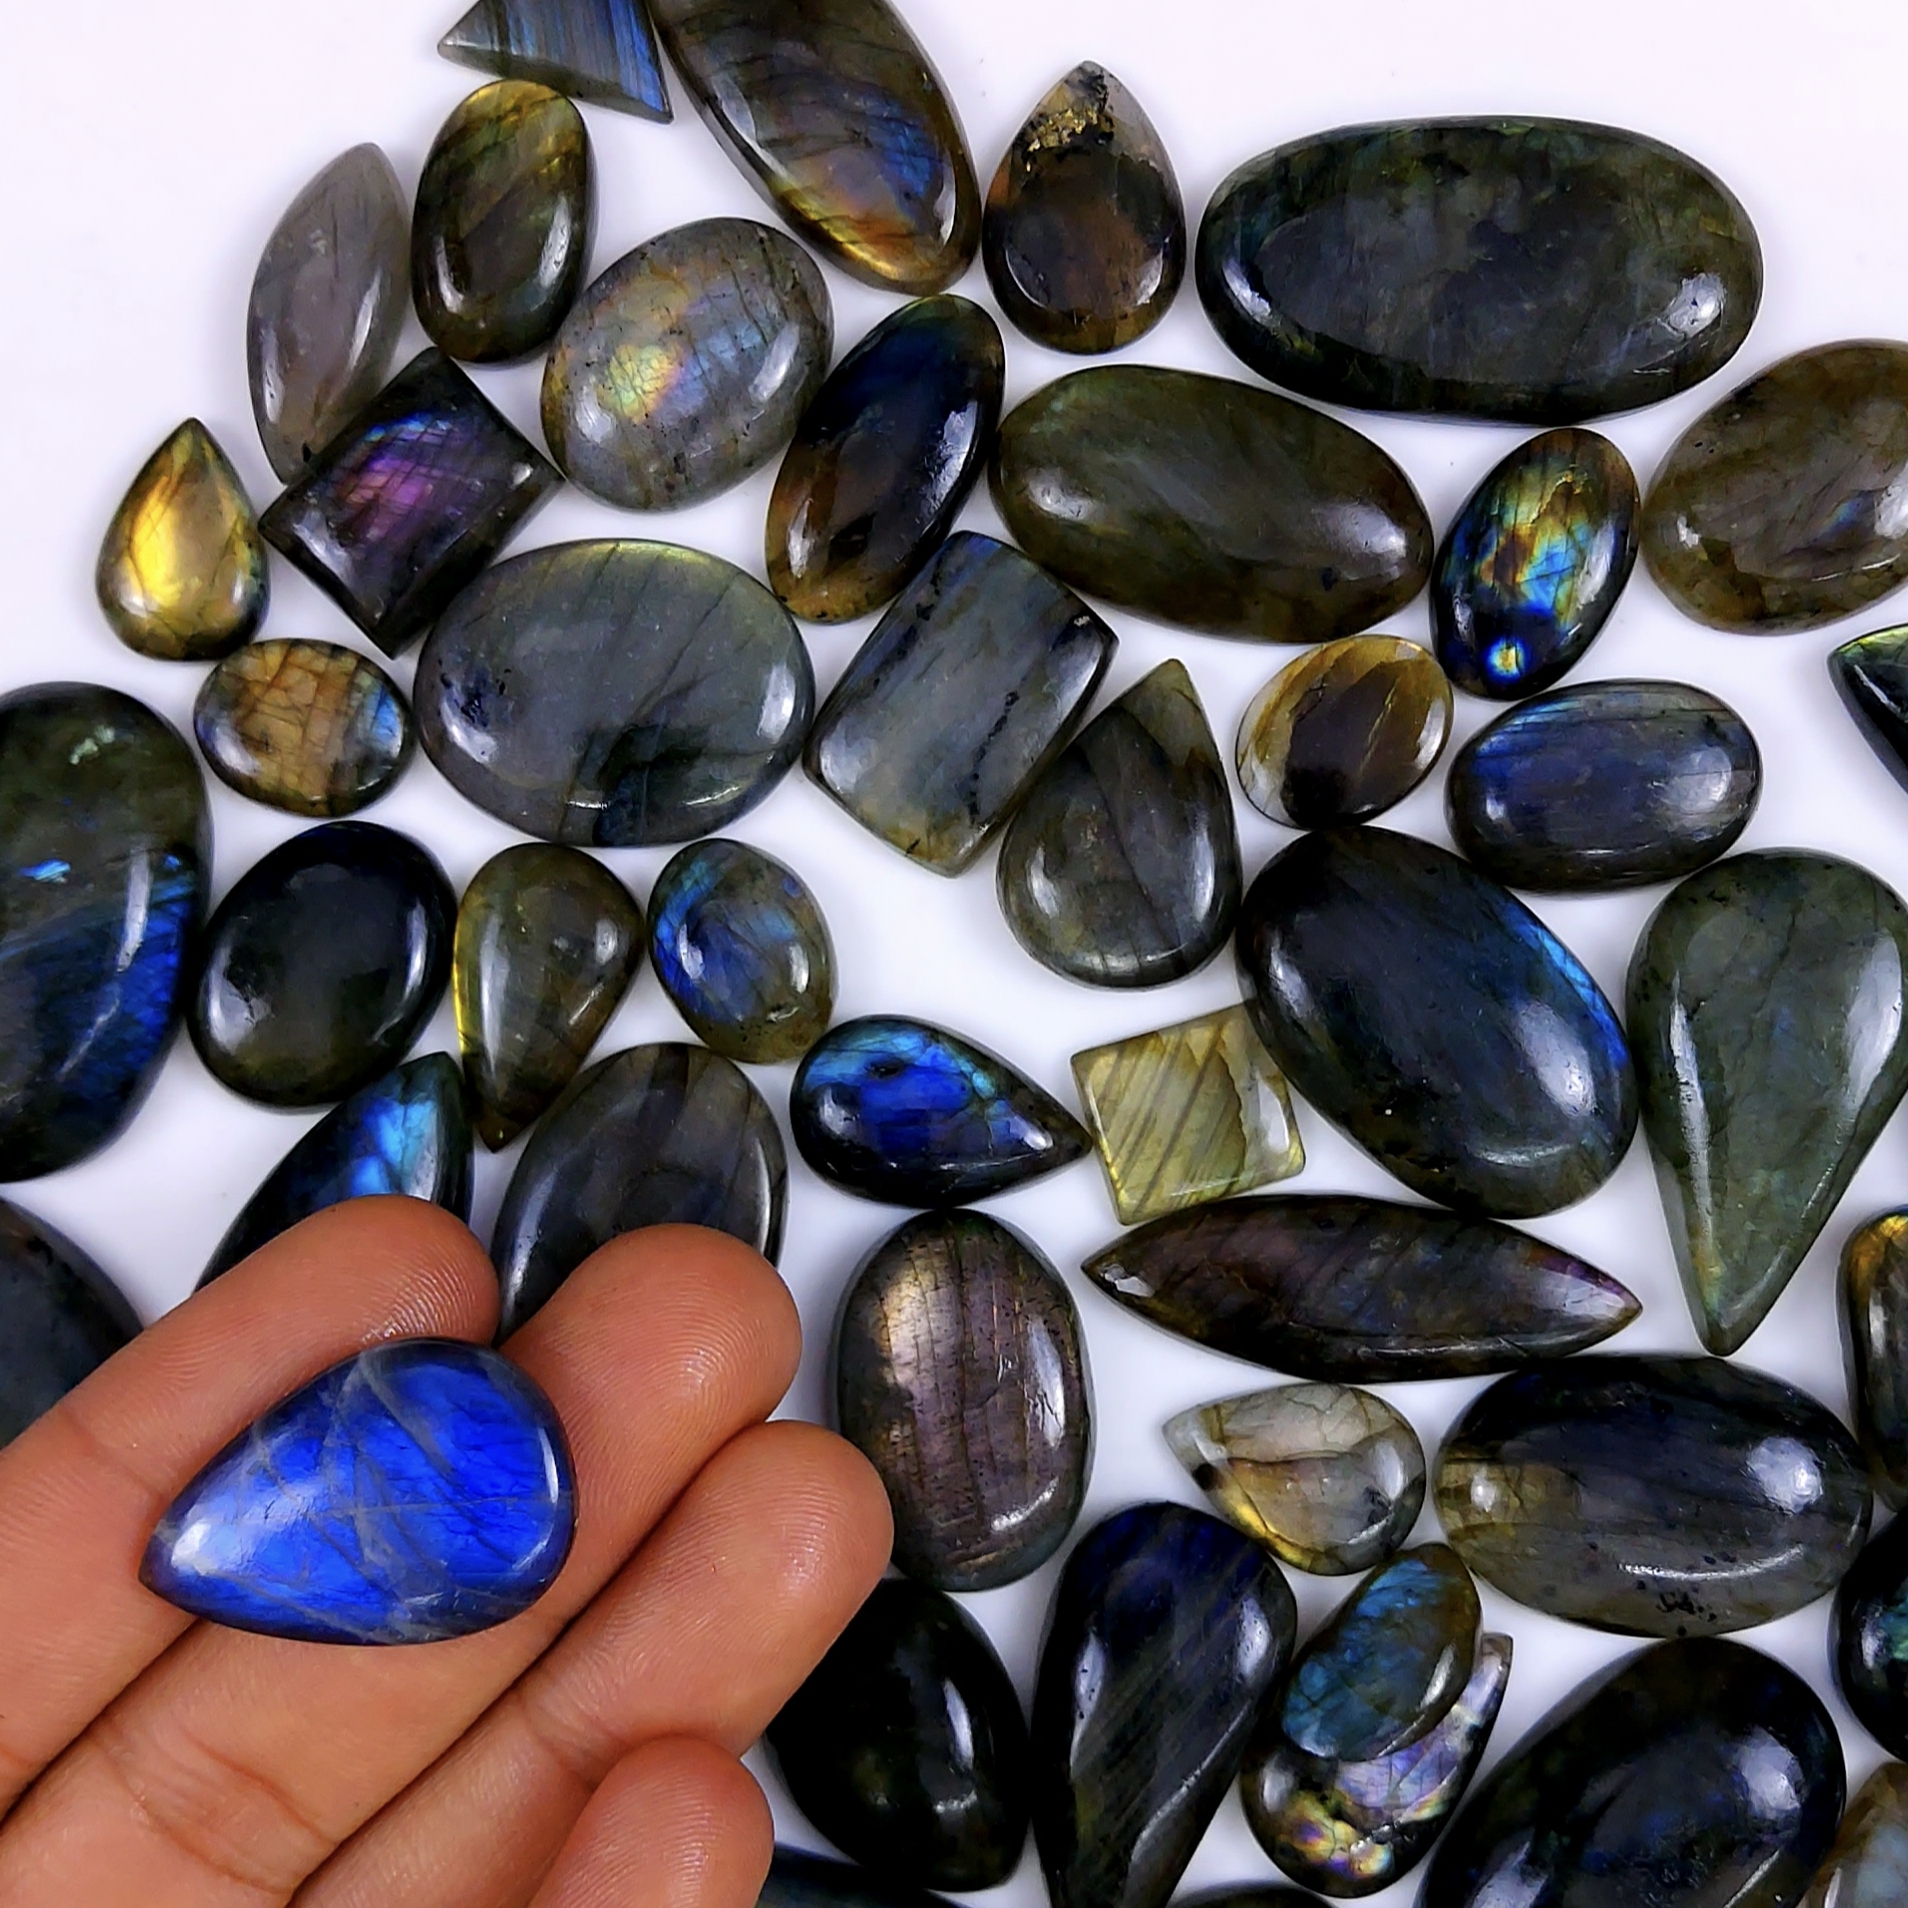 52pc 1709Cts Labradorite Cabochon Multifire Healing Crystal For Jewelry Supplies, Labradorite Necklace Handmade Wire Wrapped Gemstone Pendant 58x20 16x10mm#6291